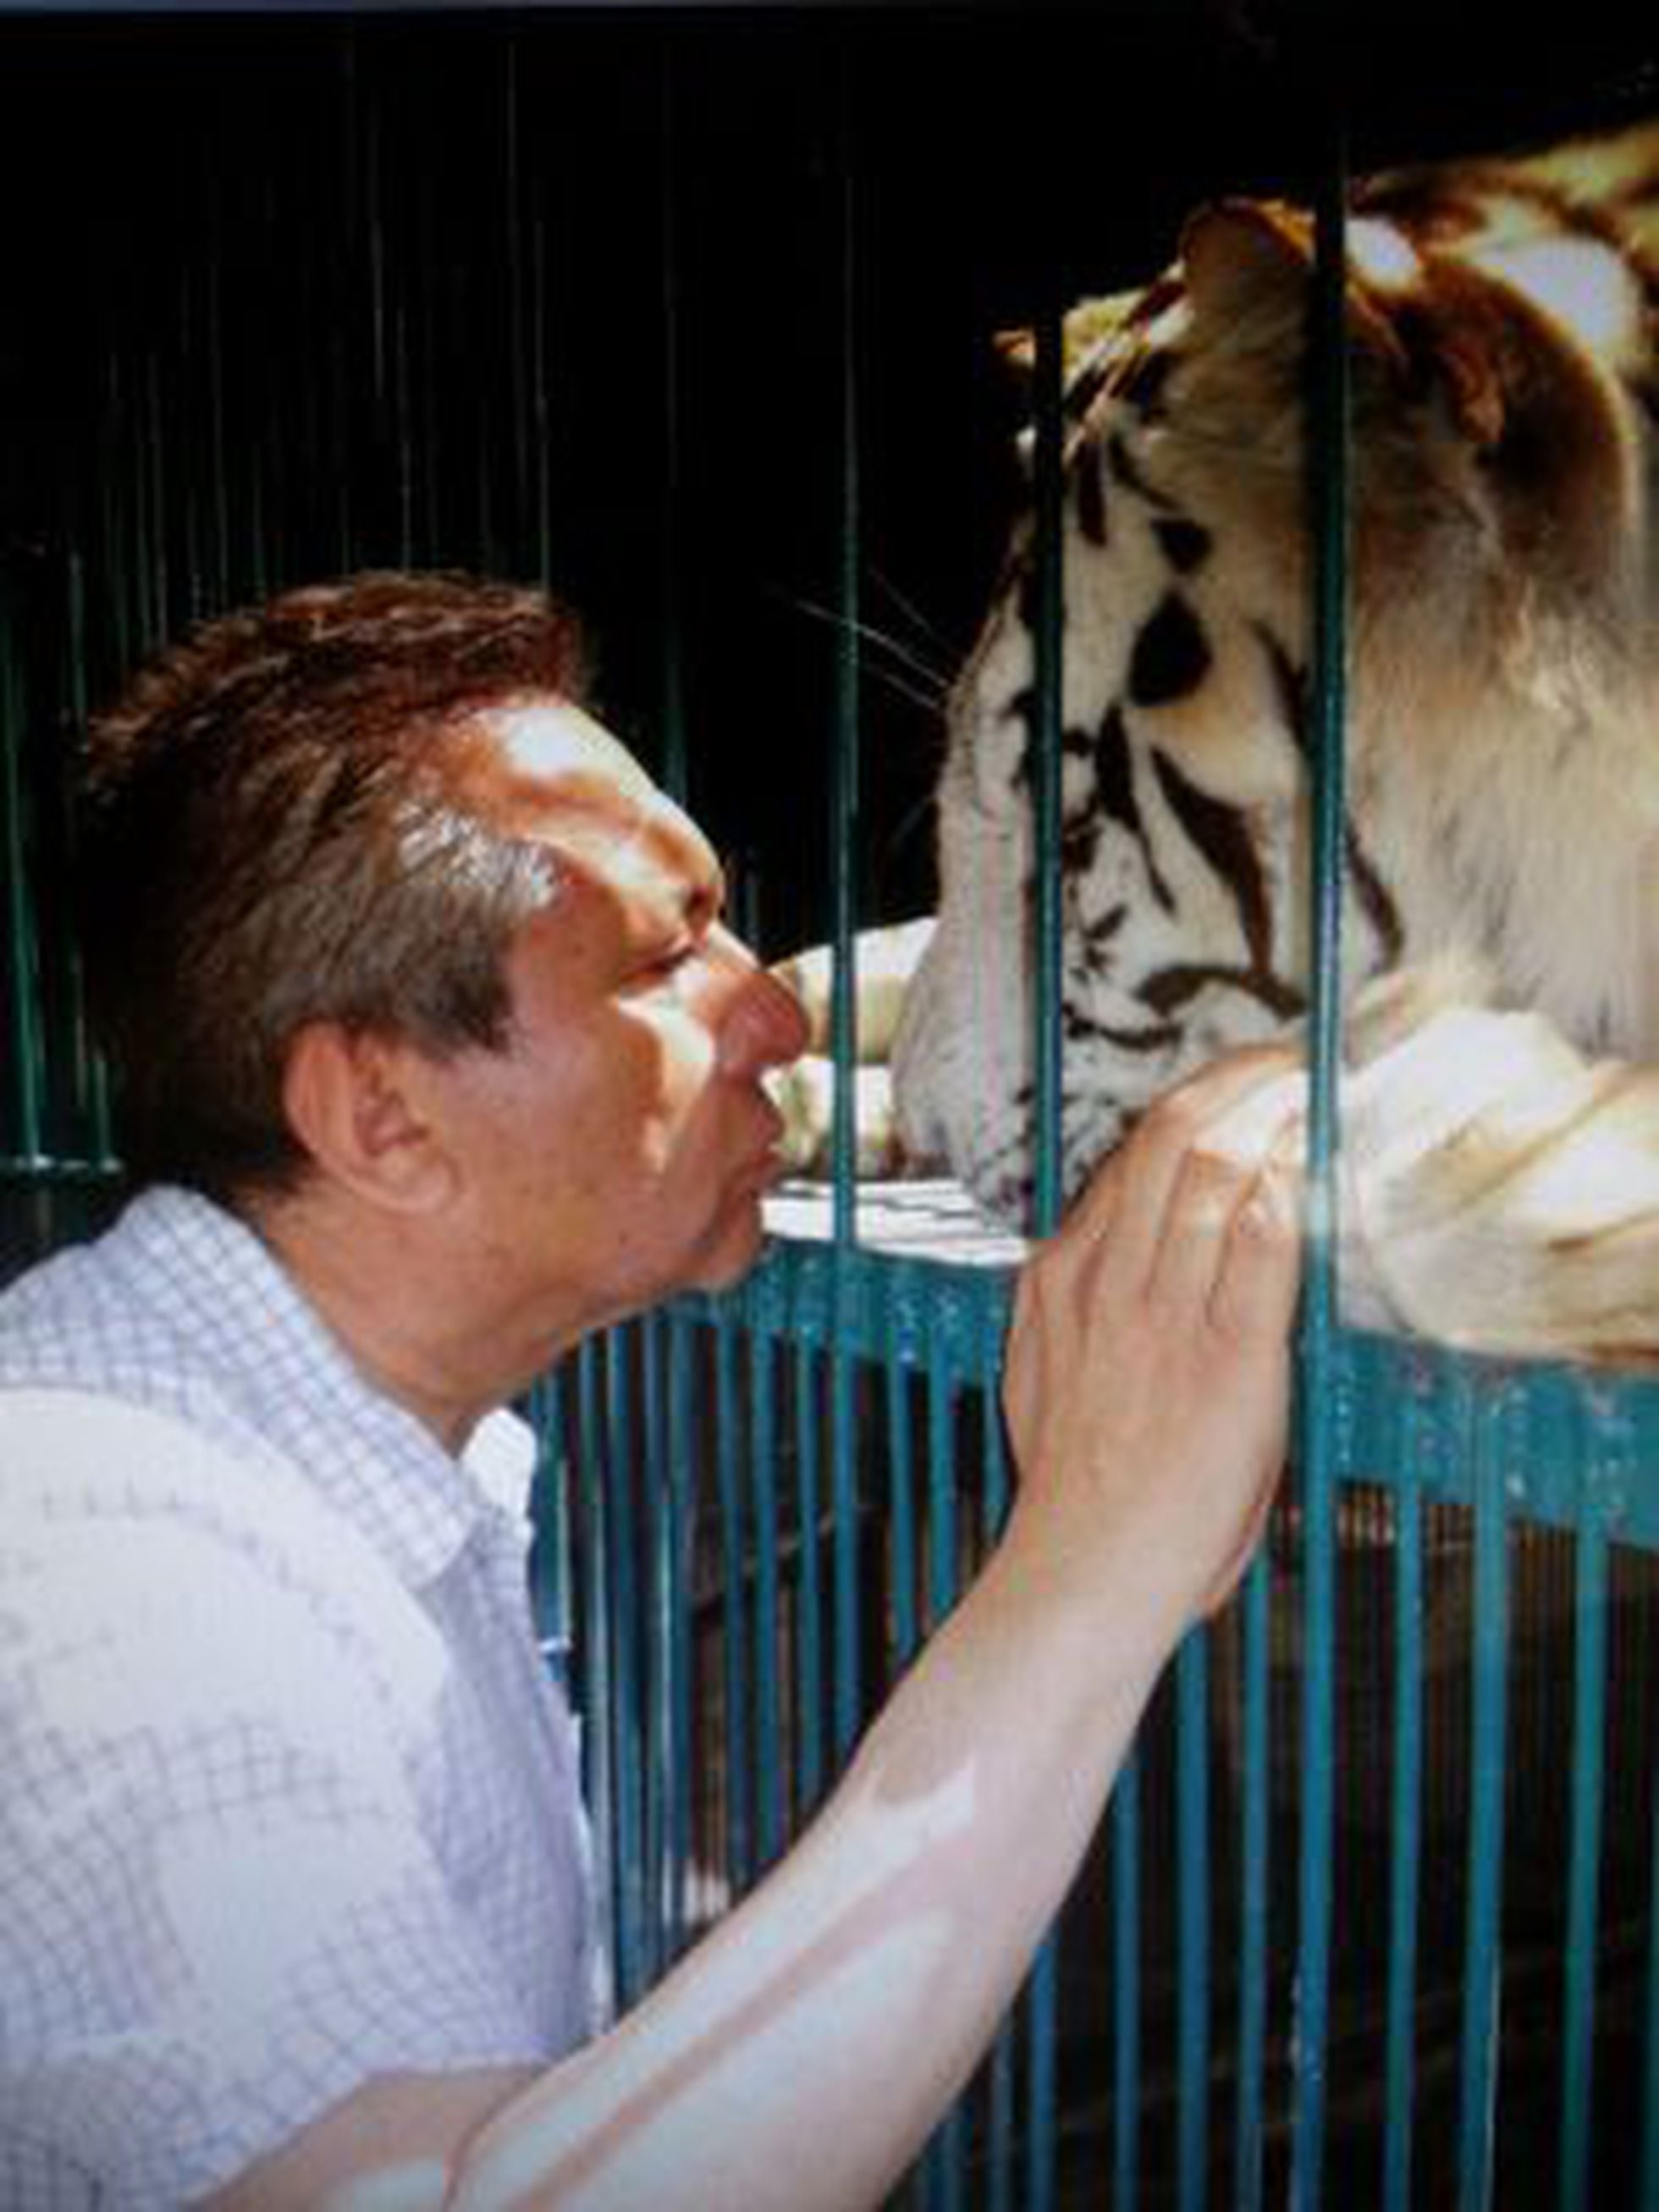 101 wild animals rescued from Mexican politician's home | Spain | EL PAÍS  English